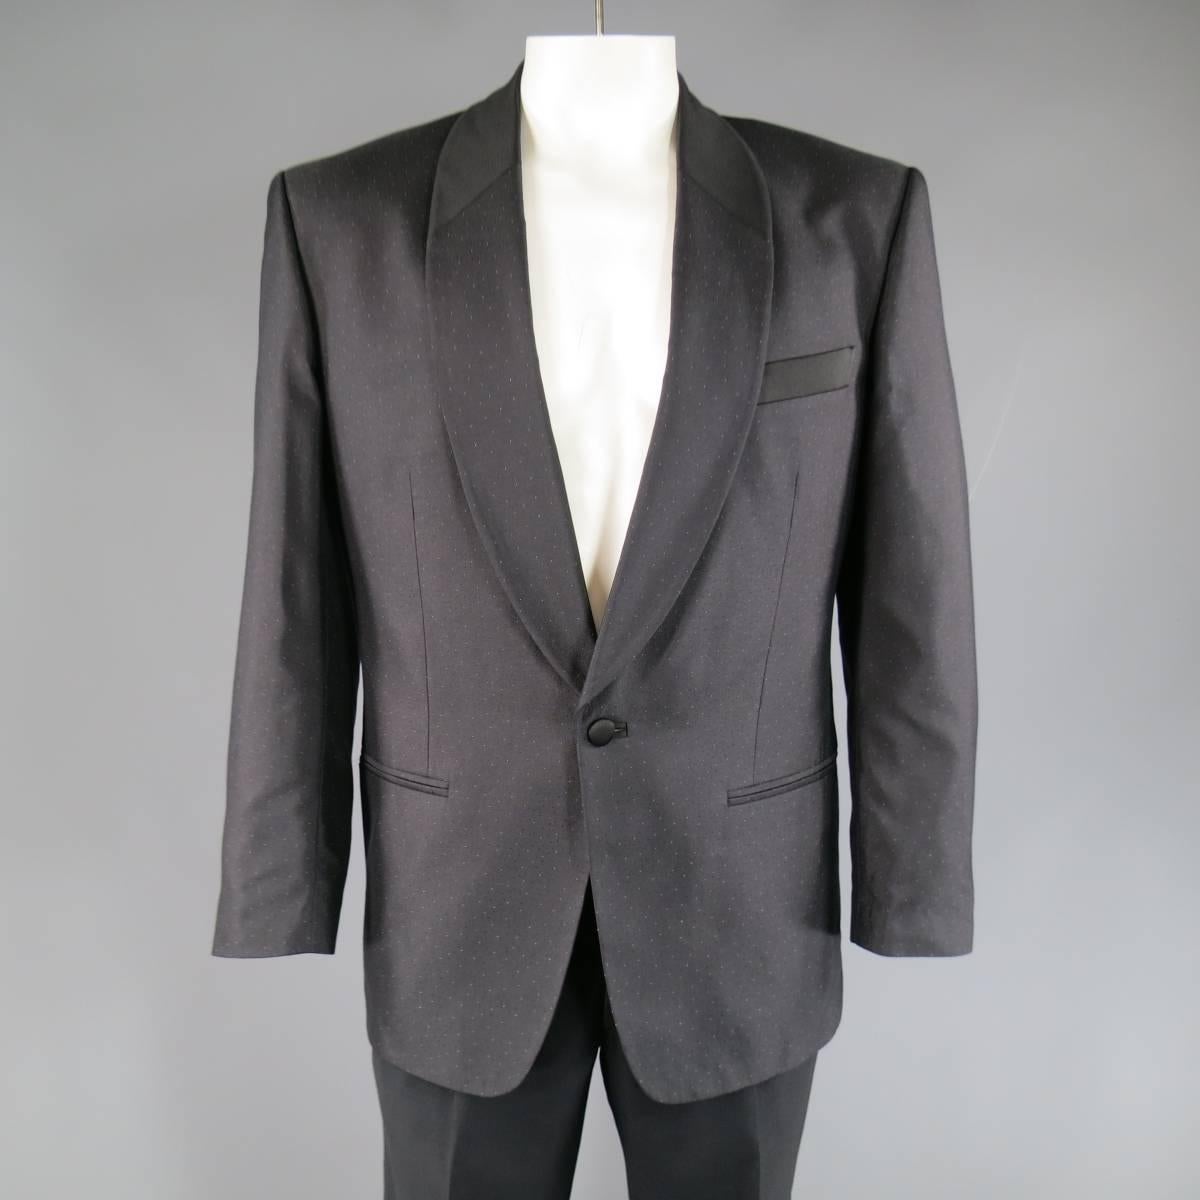 Vintage MISSONI UOMO tuxedo suit includes a silk twill, single button satin panel shawl collar, dinner jacket with allover mini blue & black spotted polka dot print and classic pleated wool trousers with double tuxedo stripe. Made in Italy.
